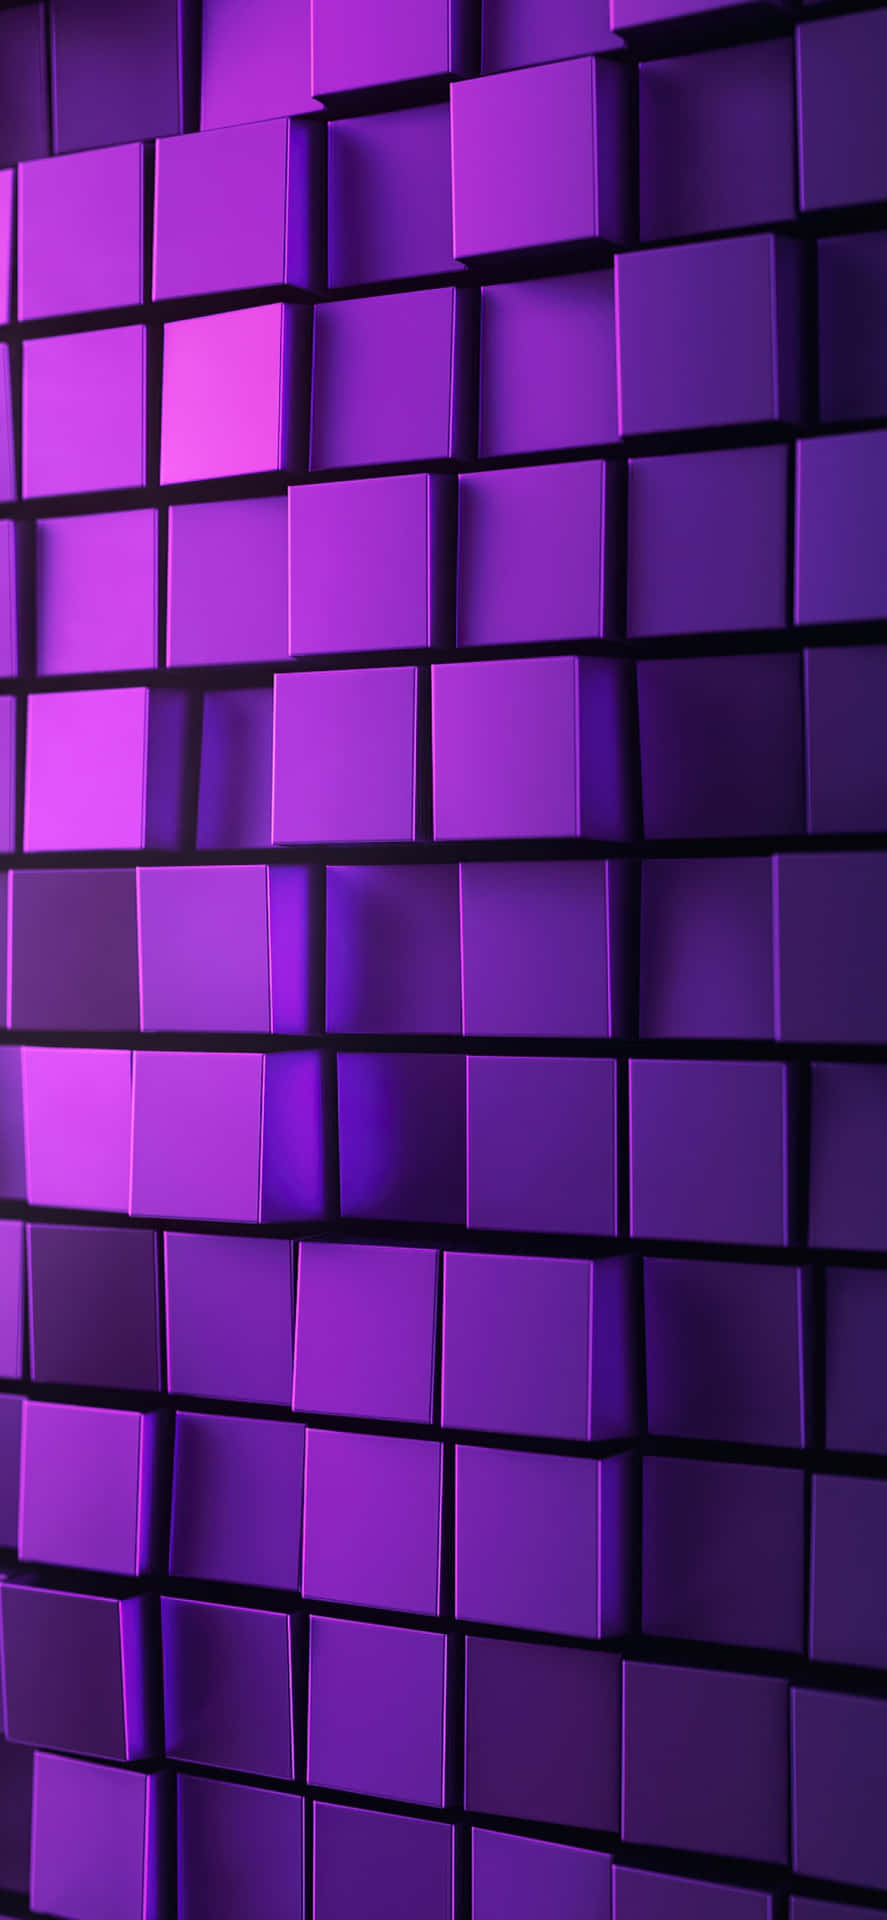 Download Purple Pictures | Wallpapers.com